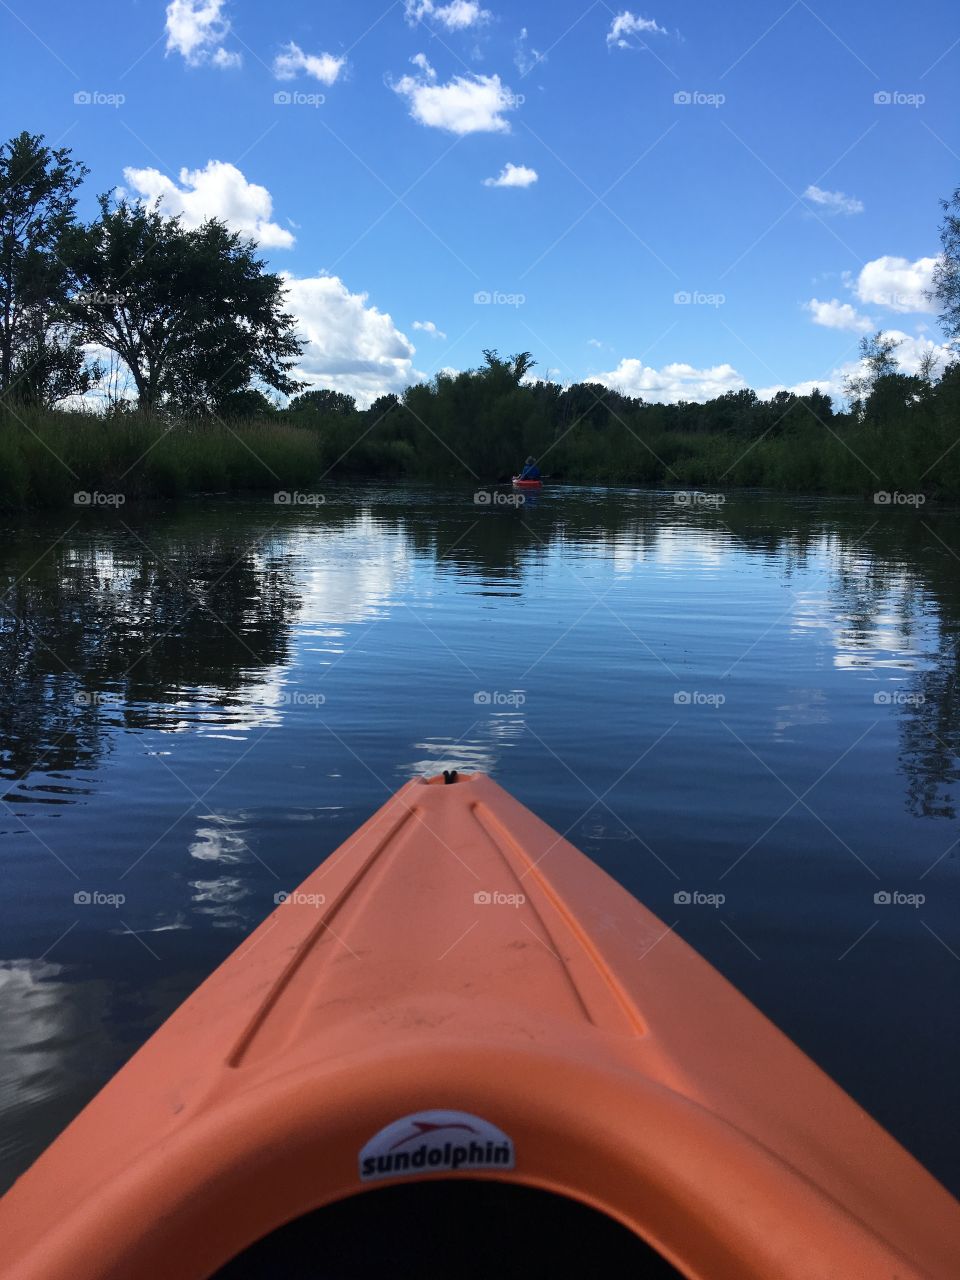 Kayaking on a beautiful summer day on a lake as smooth as glass